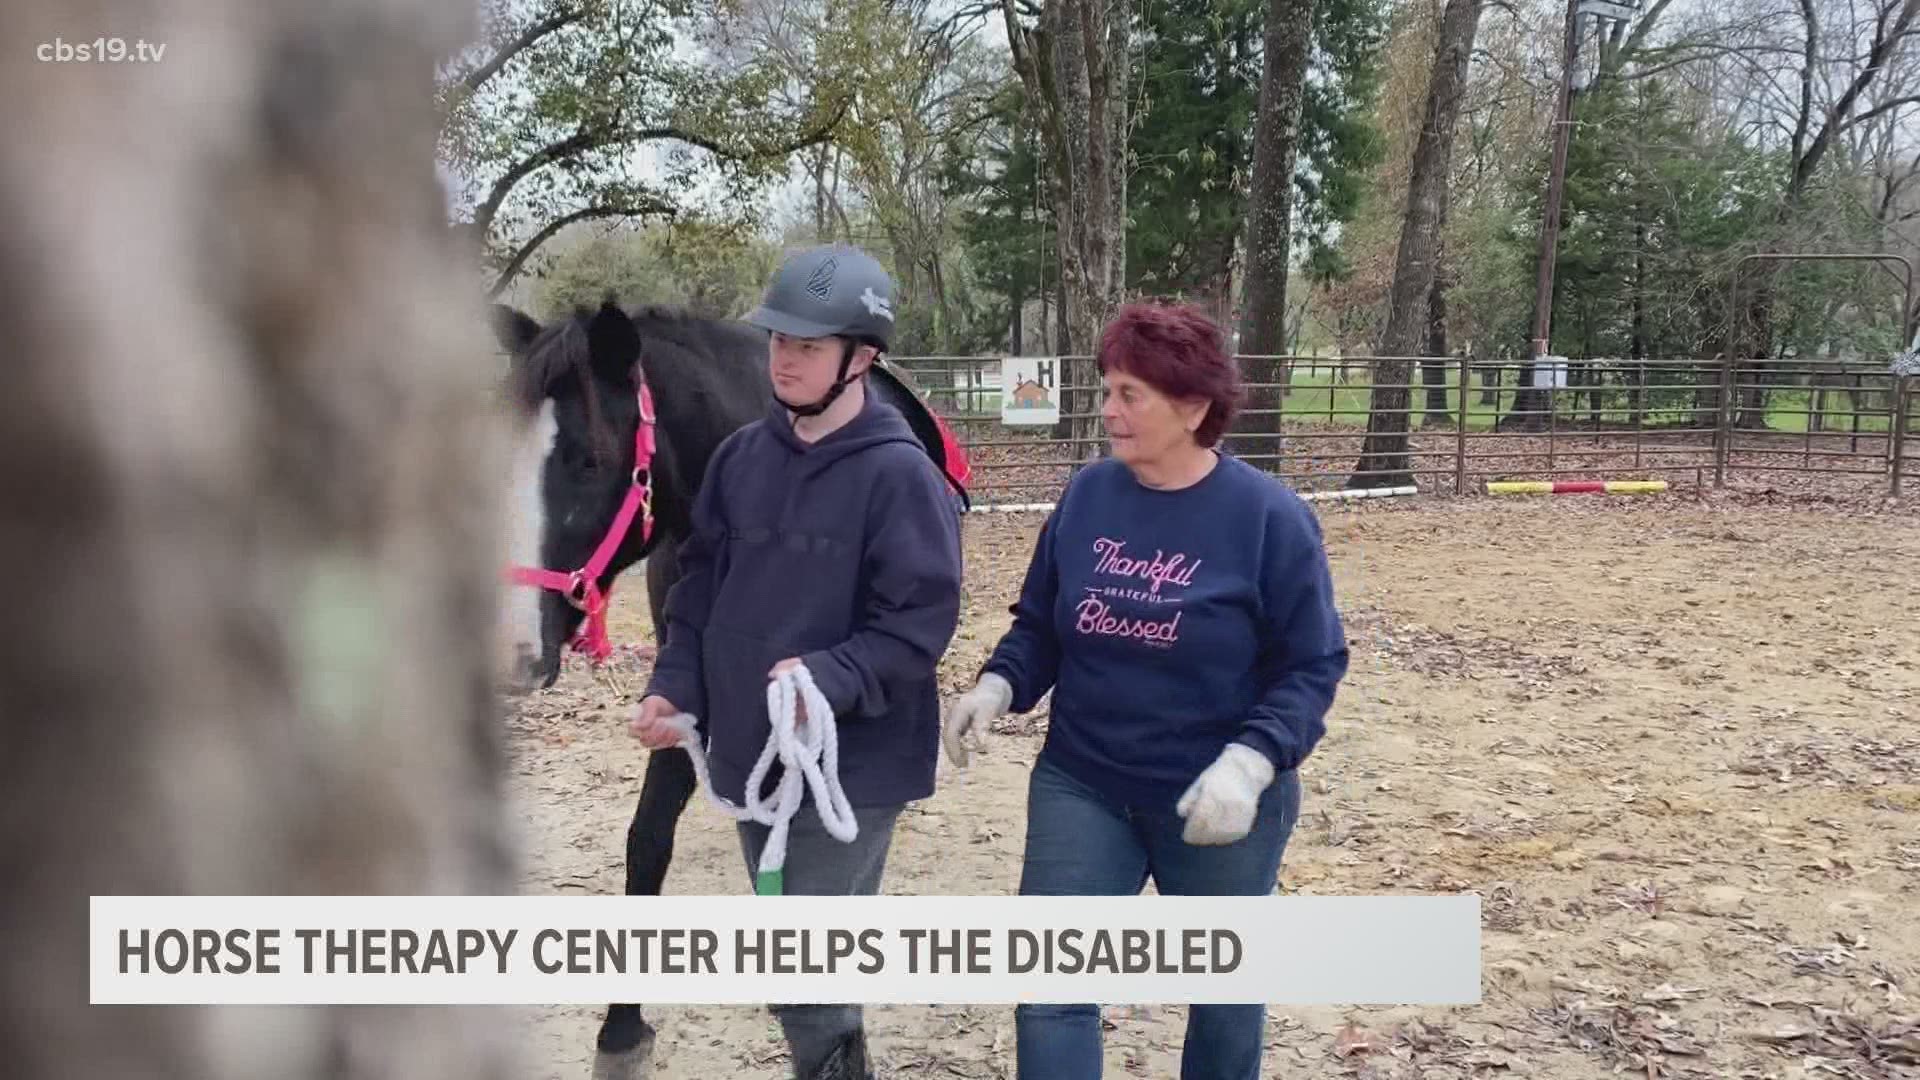 The Starbrite Therapeutic Equestrian Center in Whitehouse uses horses to make a difference.